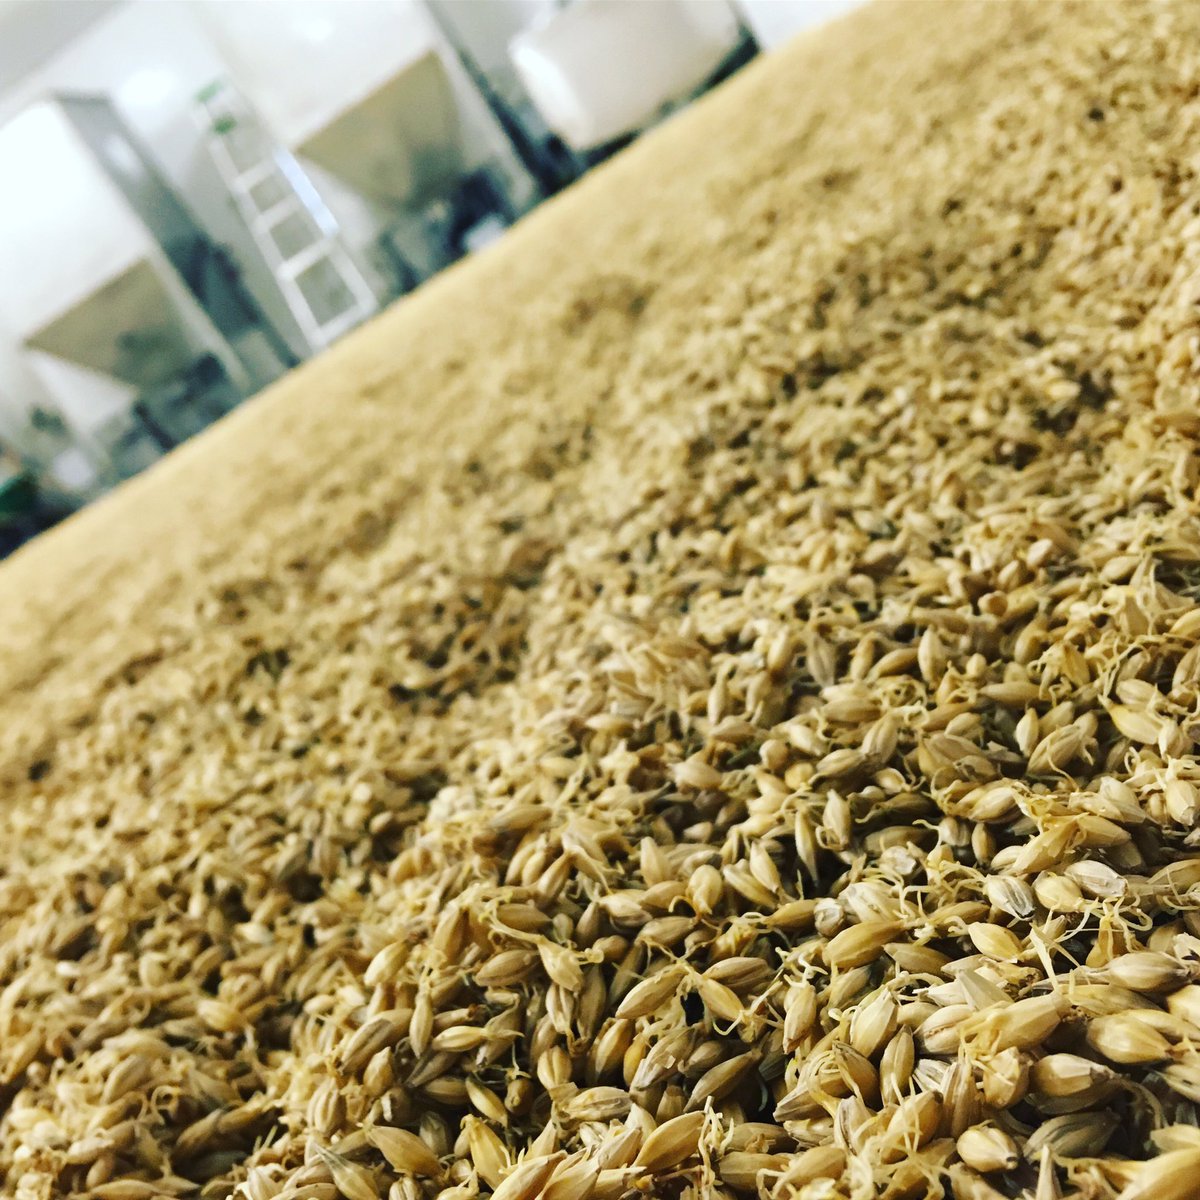 We’re just going to leave this here...

#allthemalt #barnowlmalt #floormalt #floormalting #floormalted #ontariomalt #craftmalt #ontariobarley #traceability #madeinquinte #drinklocal #suportlocal #localingredients #brewlocal